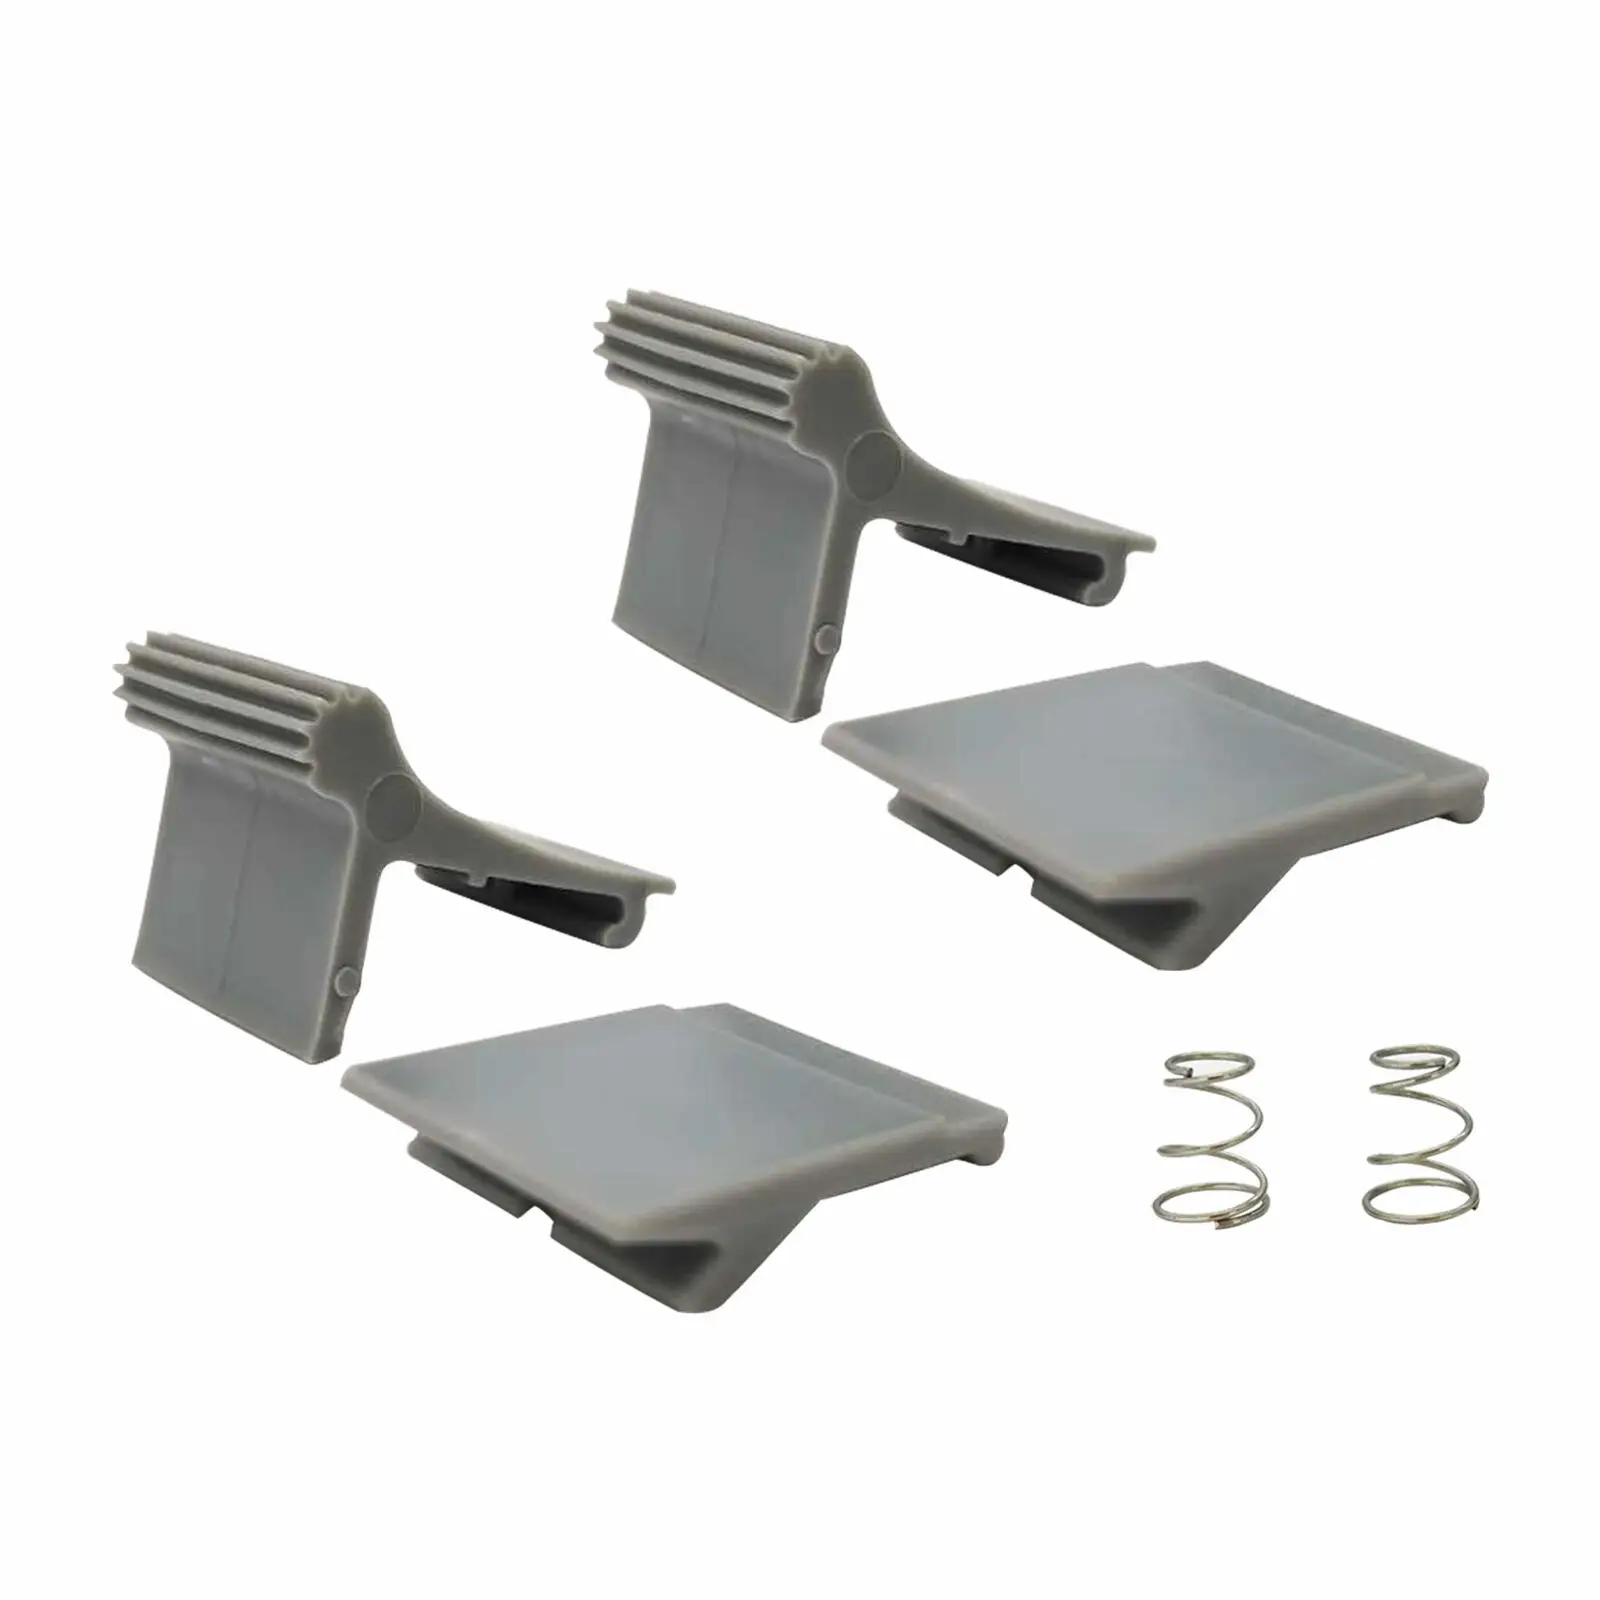 830472P002 RV Patio Awning Slider Catch patio retractable side awning 80x300 cm grey